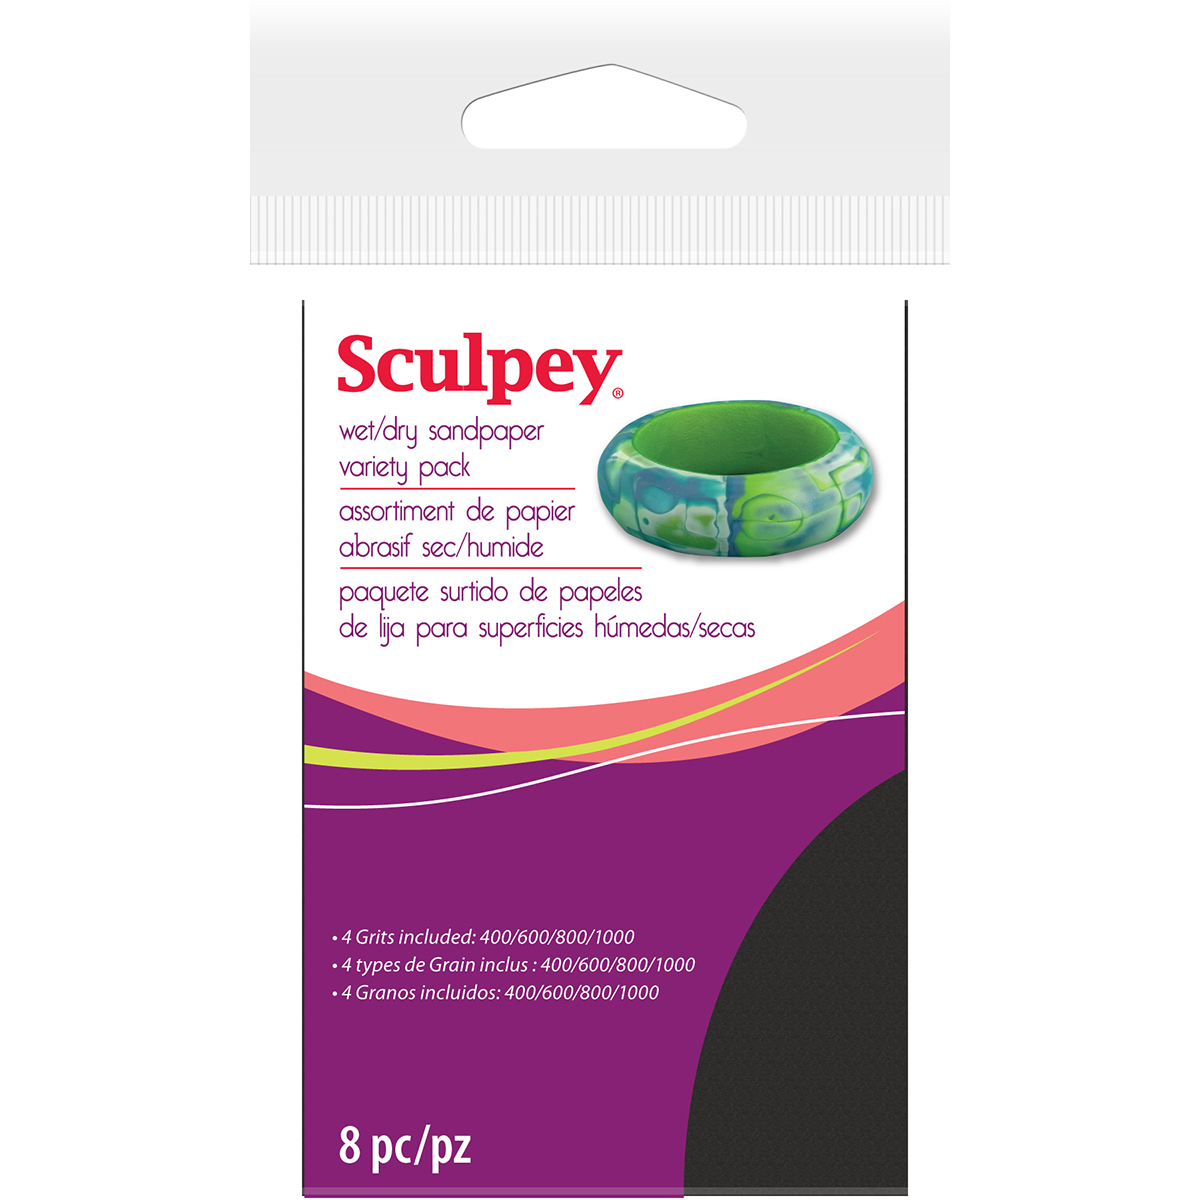 Sculpey Wet/Dry Sandpaper Variety Pack, 8pc, 2.75" x 4.5" - image 1 of 2